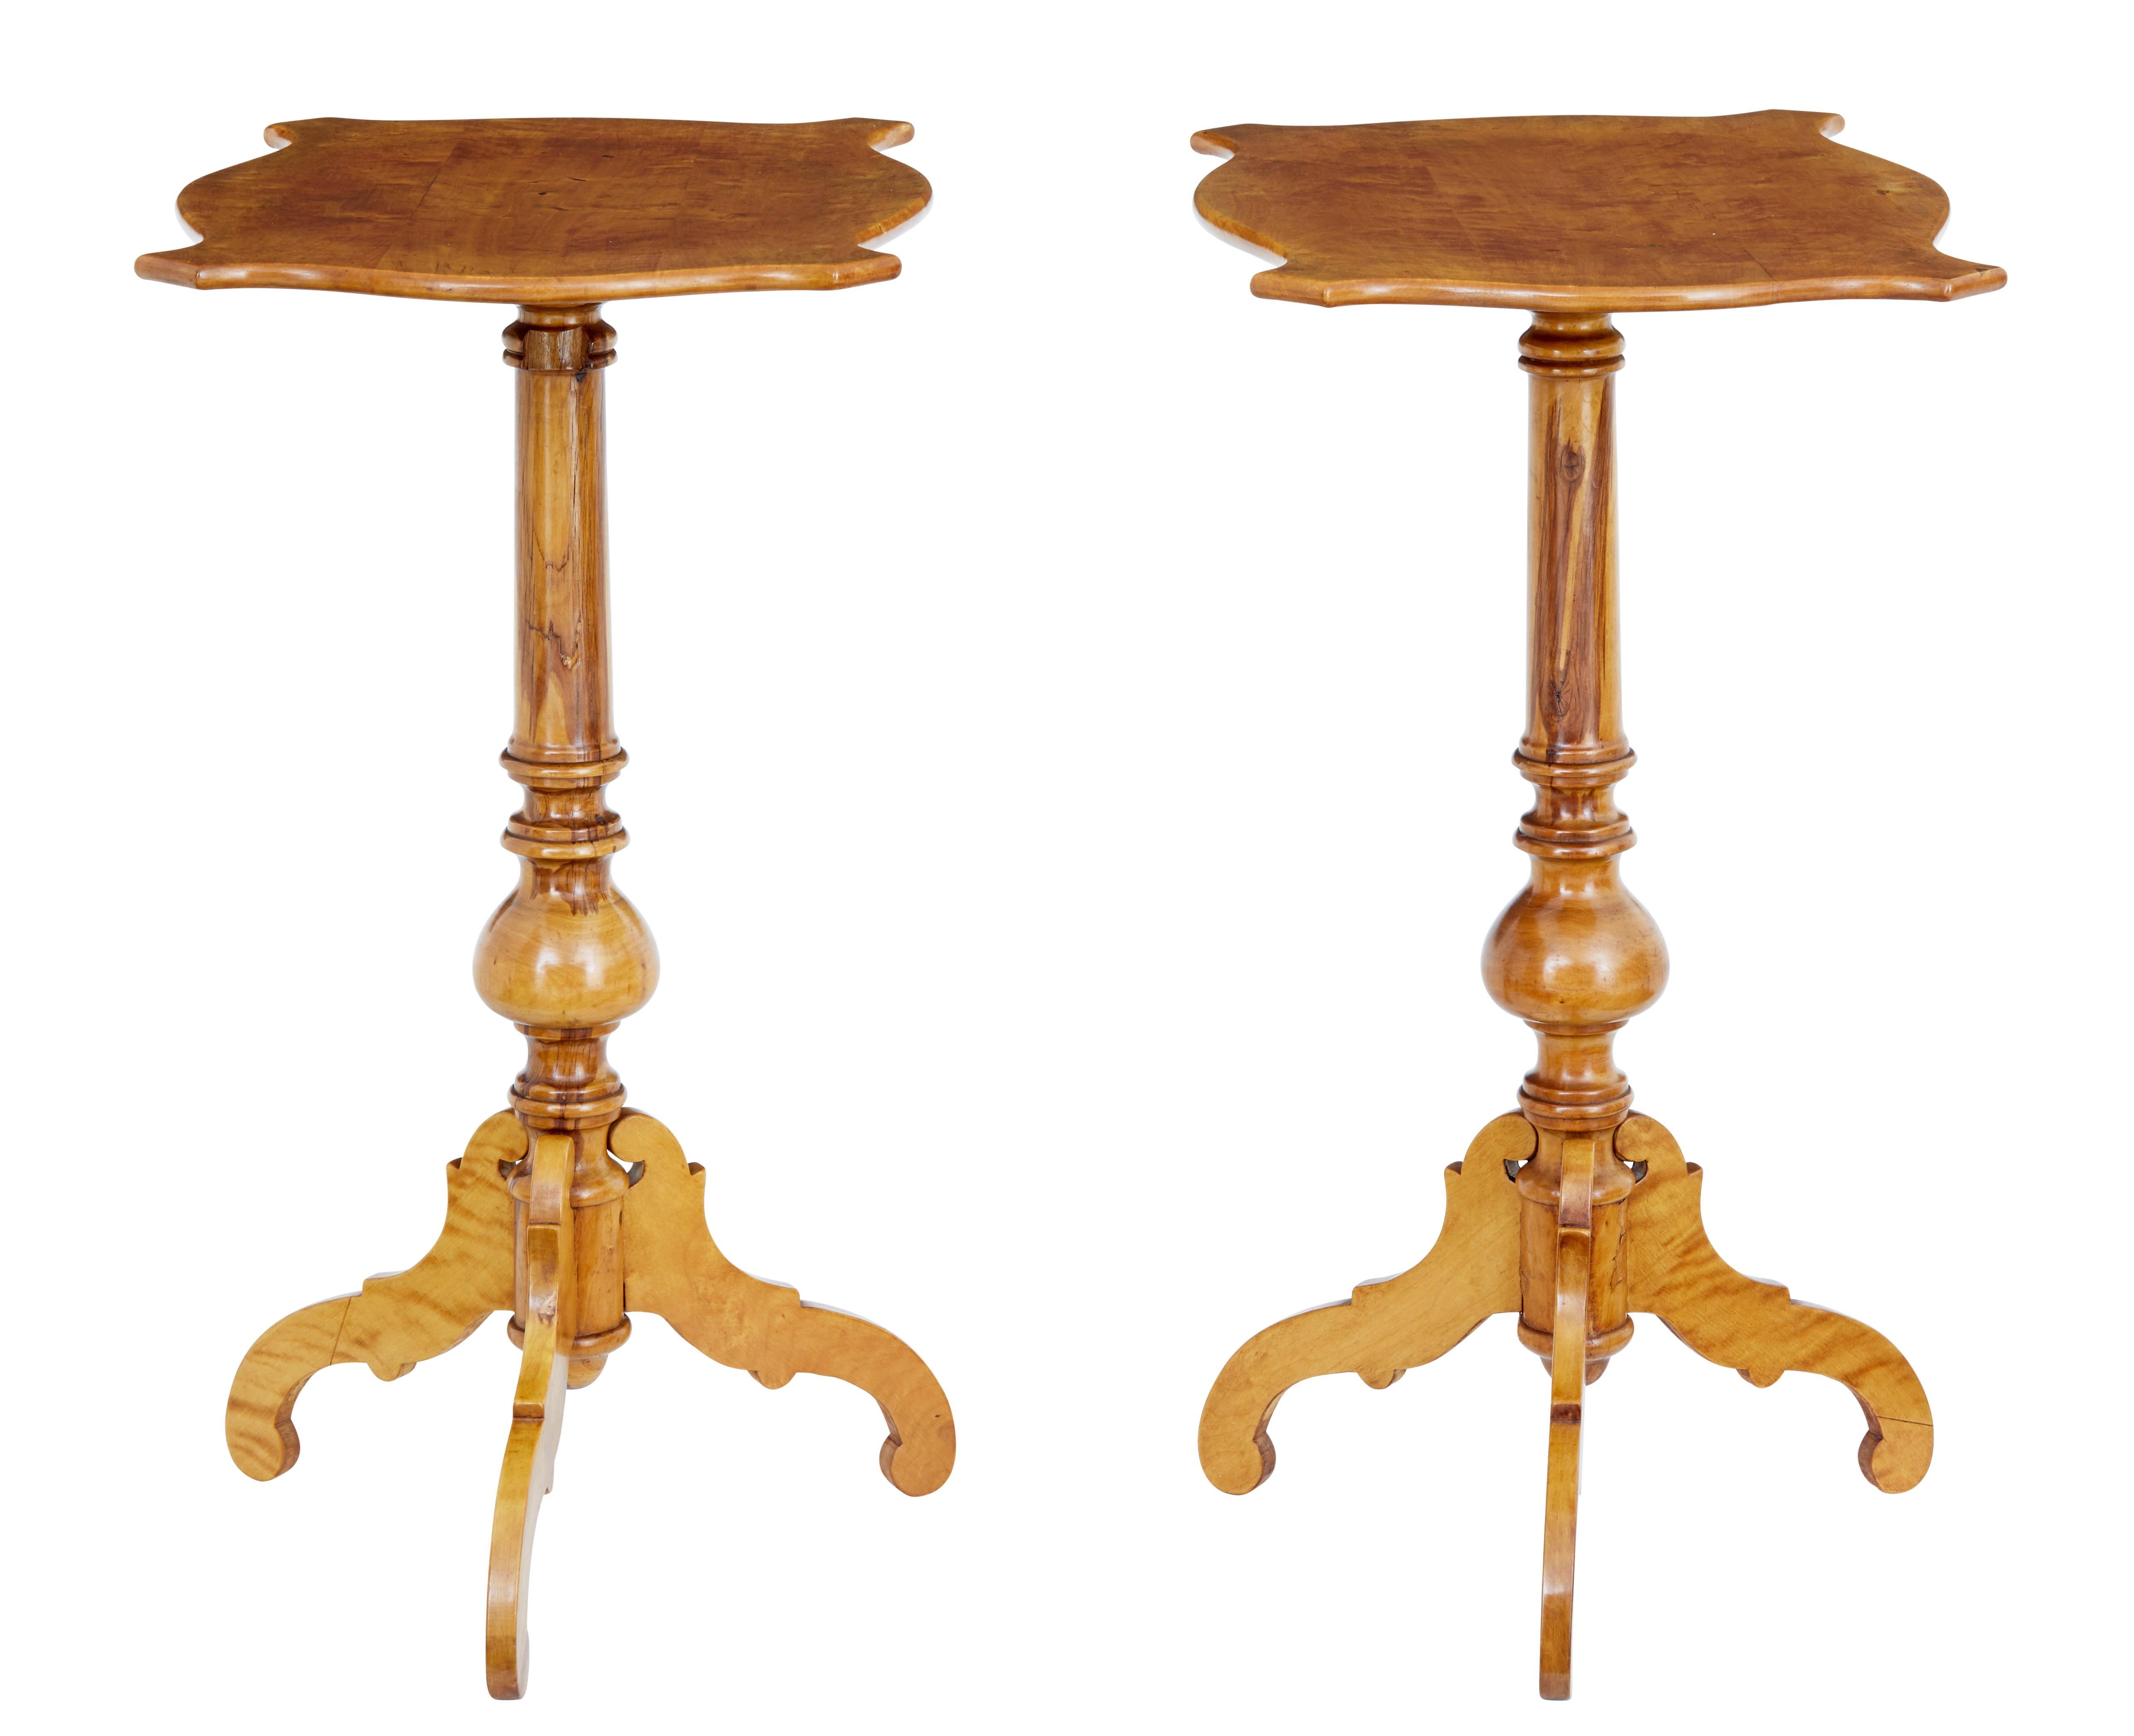 Good quality pair of 19th century Swedish birch side tables, circa 1890.

Shaped rectangular tops, standing on turned stem and scrolled tripod base. Functional as a pair of lamp tables or to be positioned about the home.

Rich golden birch color